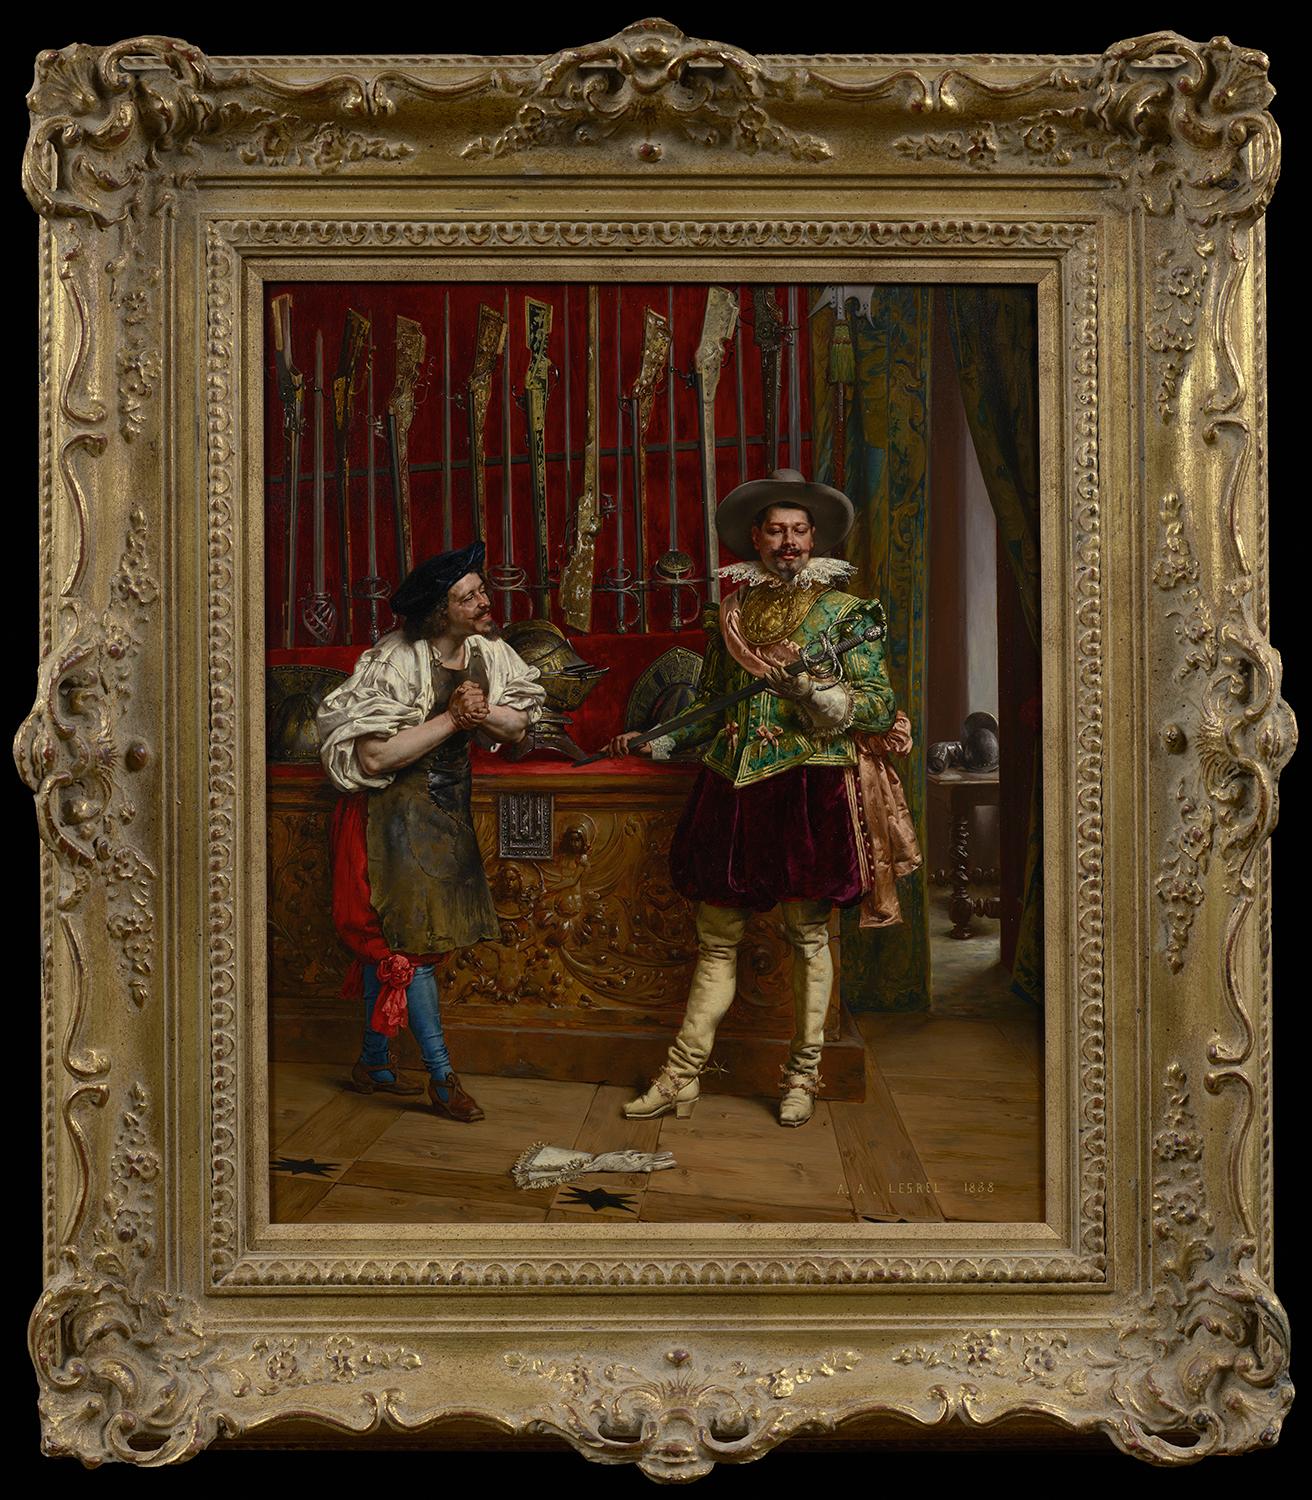 A New Sword - Painting by Adolphe Alexandrew Lesrel